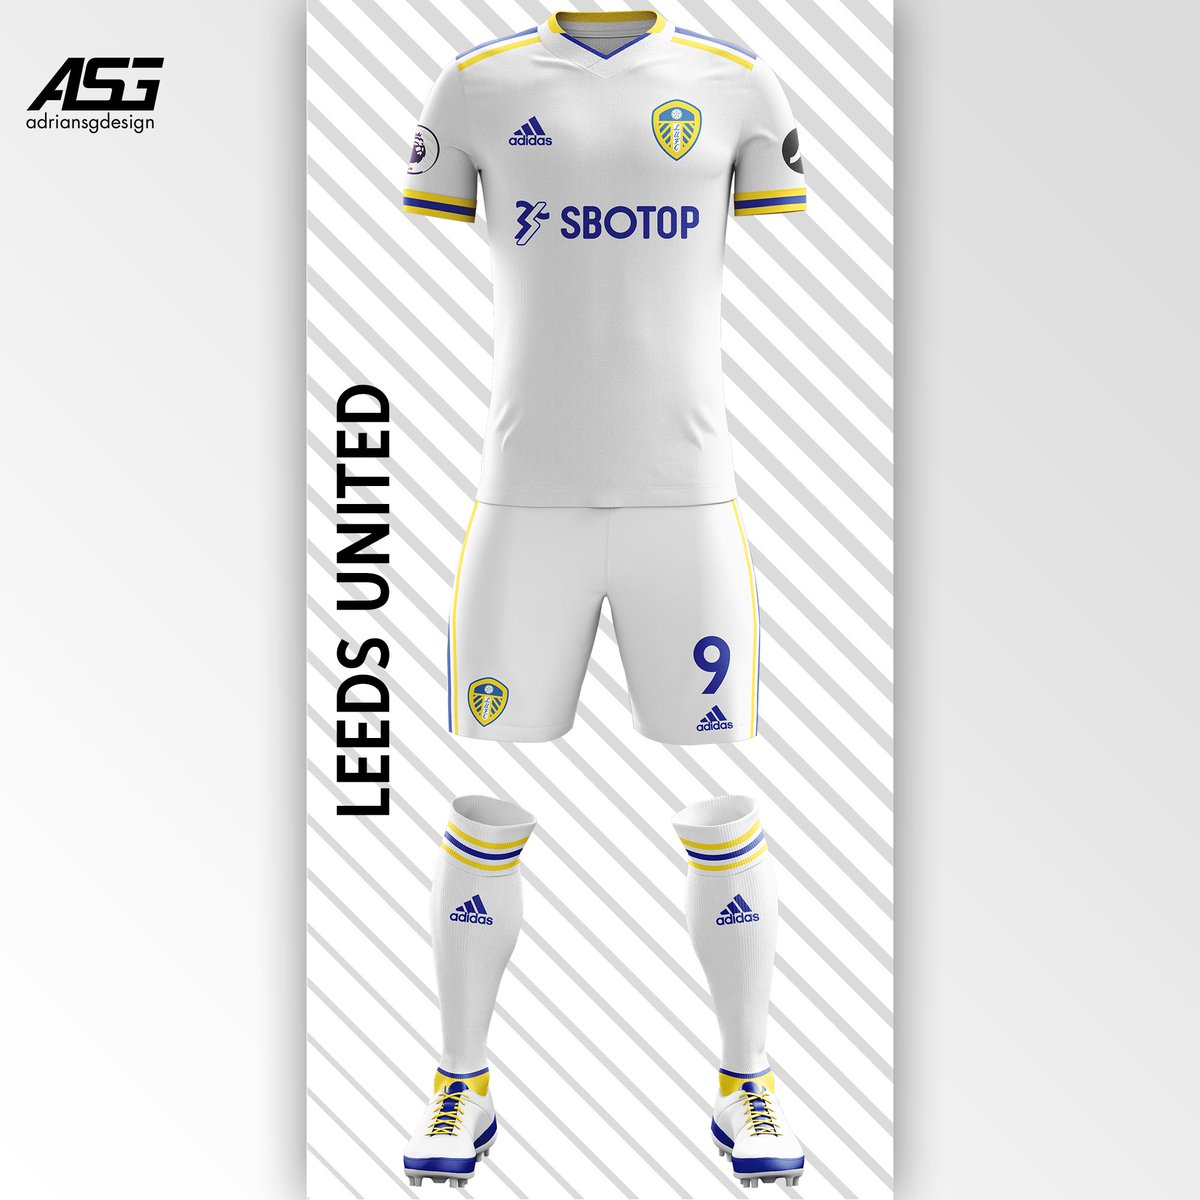 Leeds  @LUFC White base with some yellow and blue highlights. One of the adidas lines are blue with the other two being yellow.